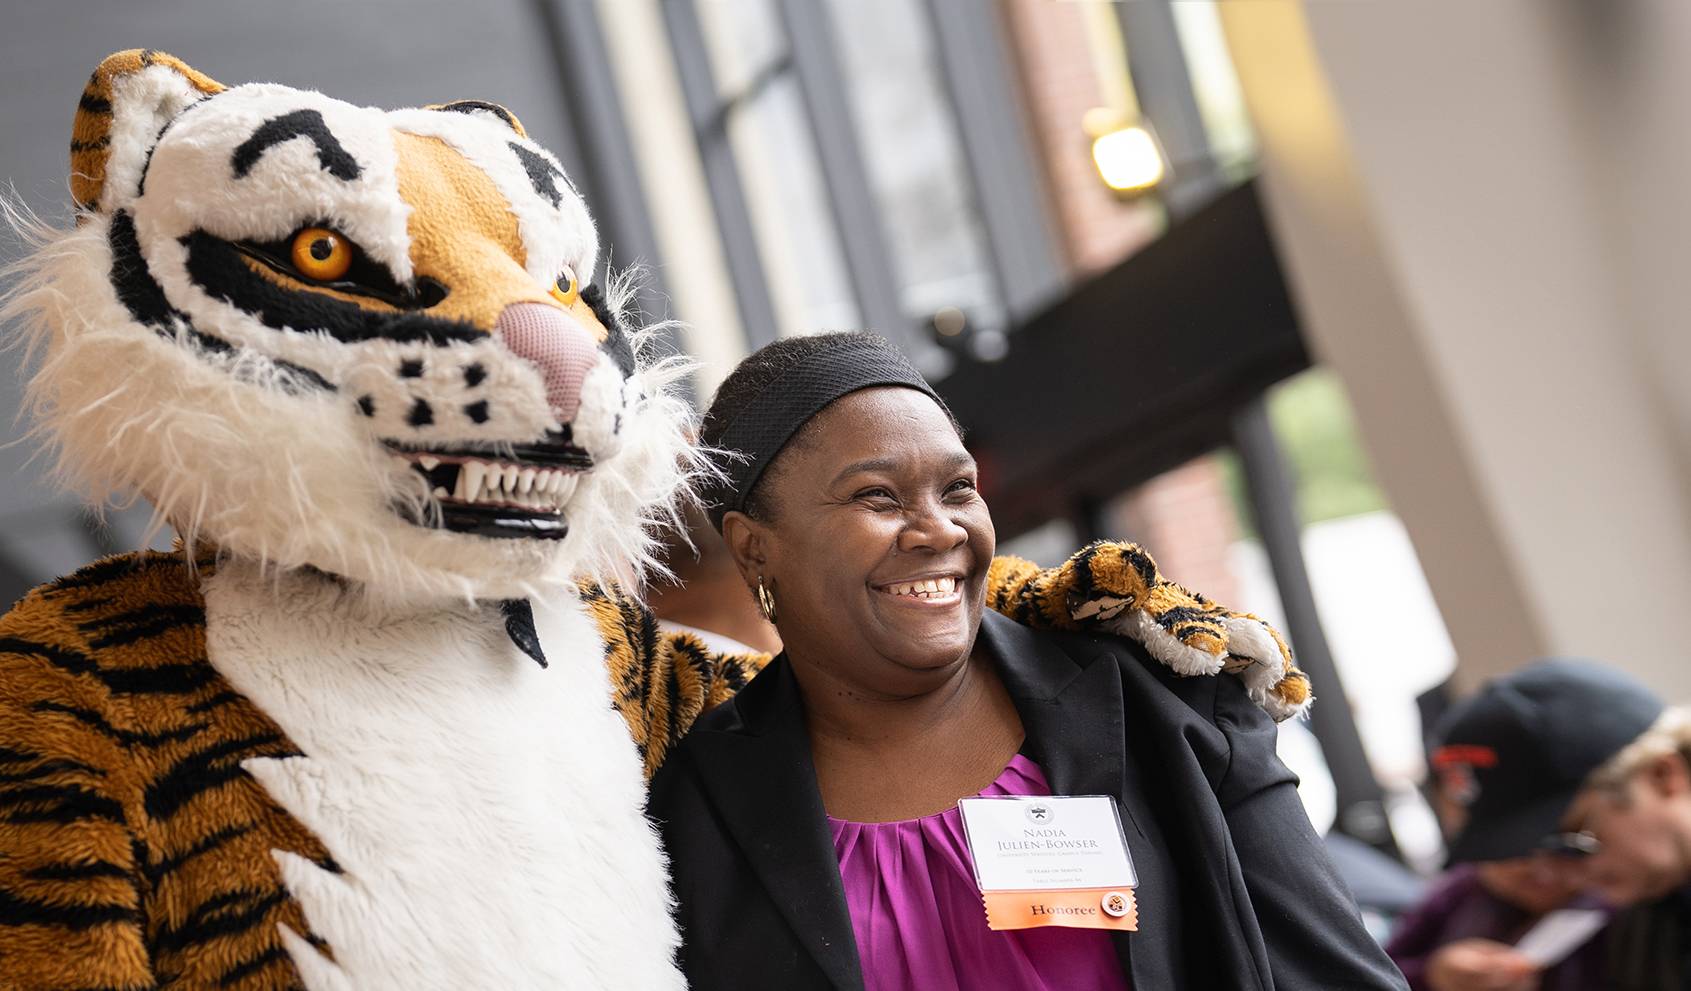 Nadia Julien-Bowser poses with the Princeton Tiger